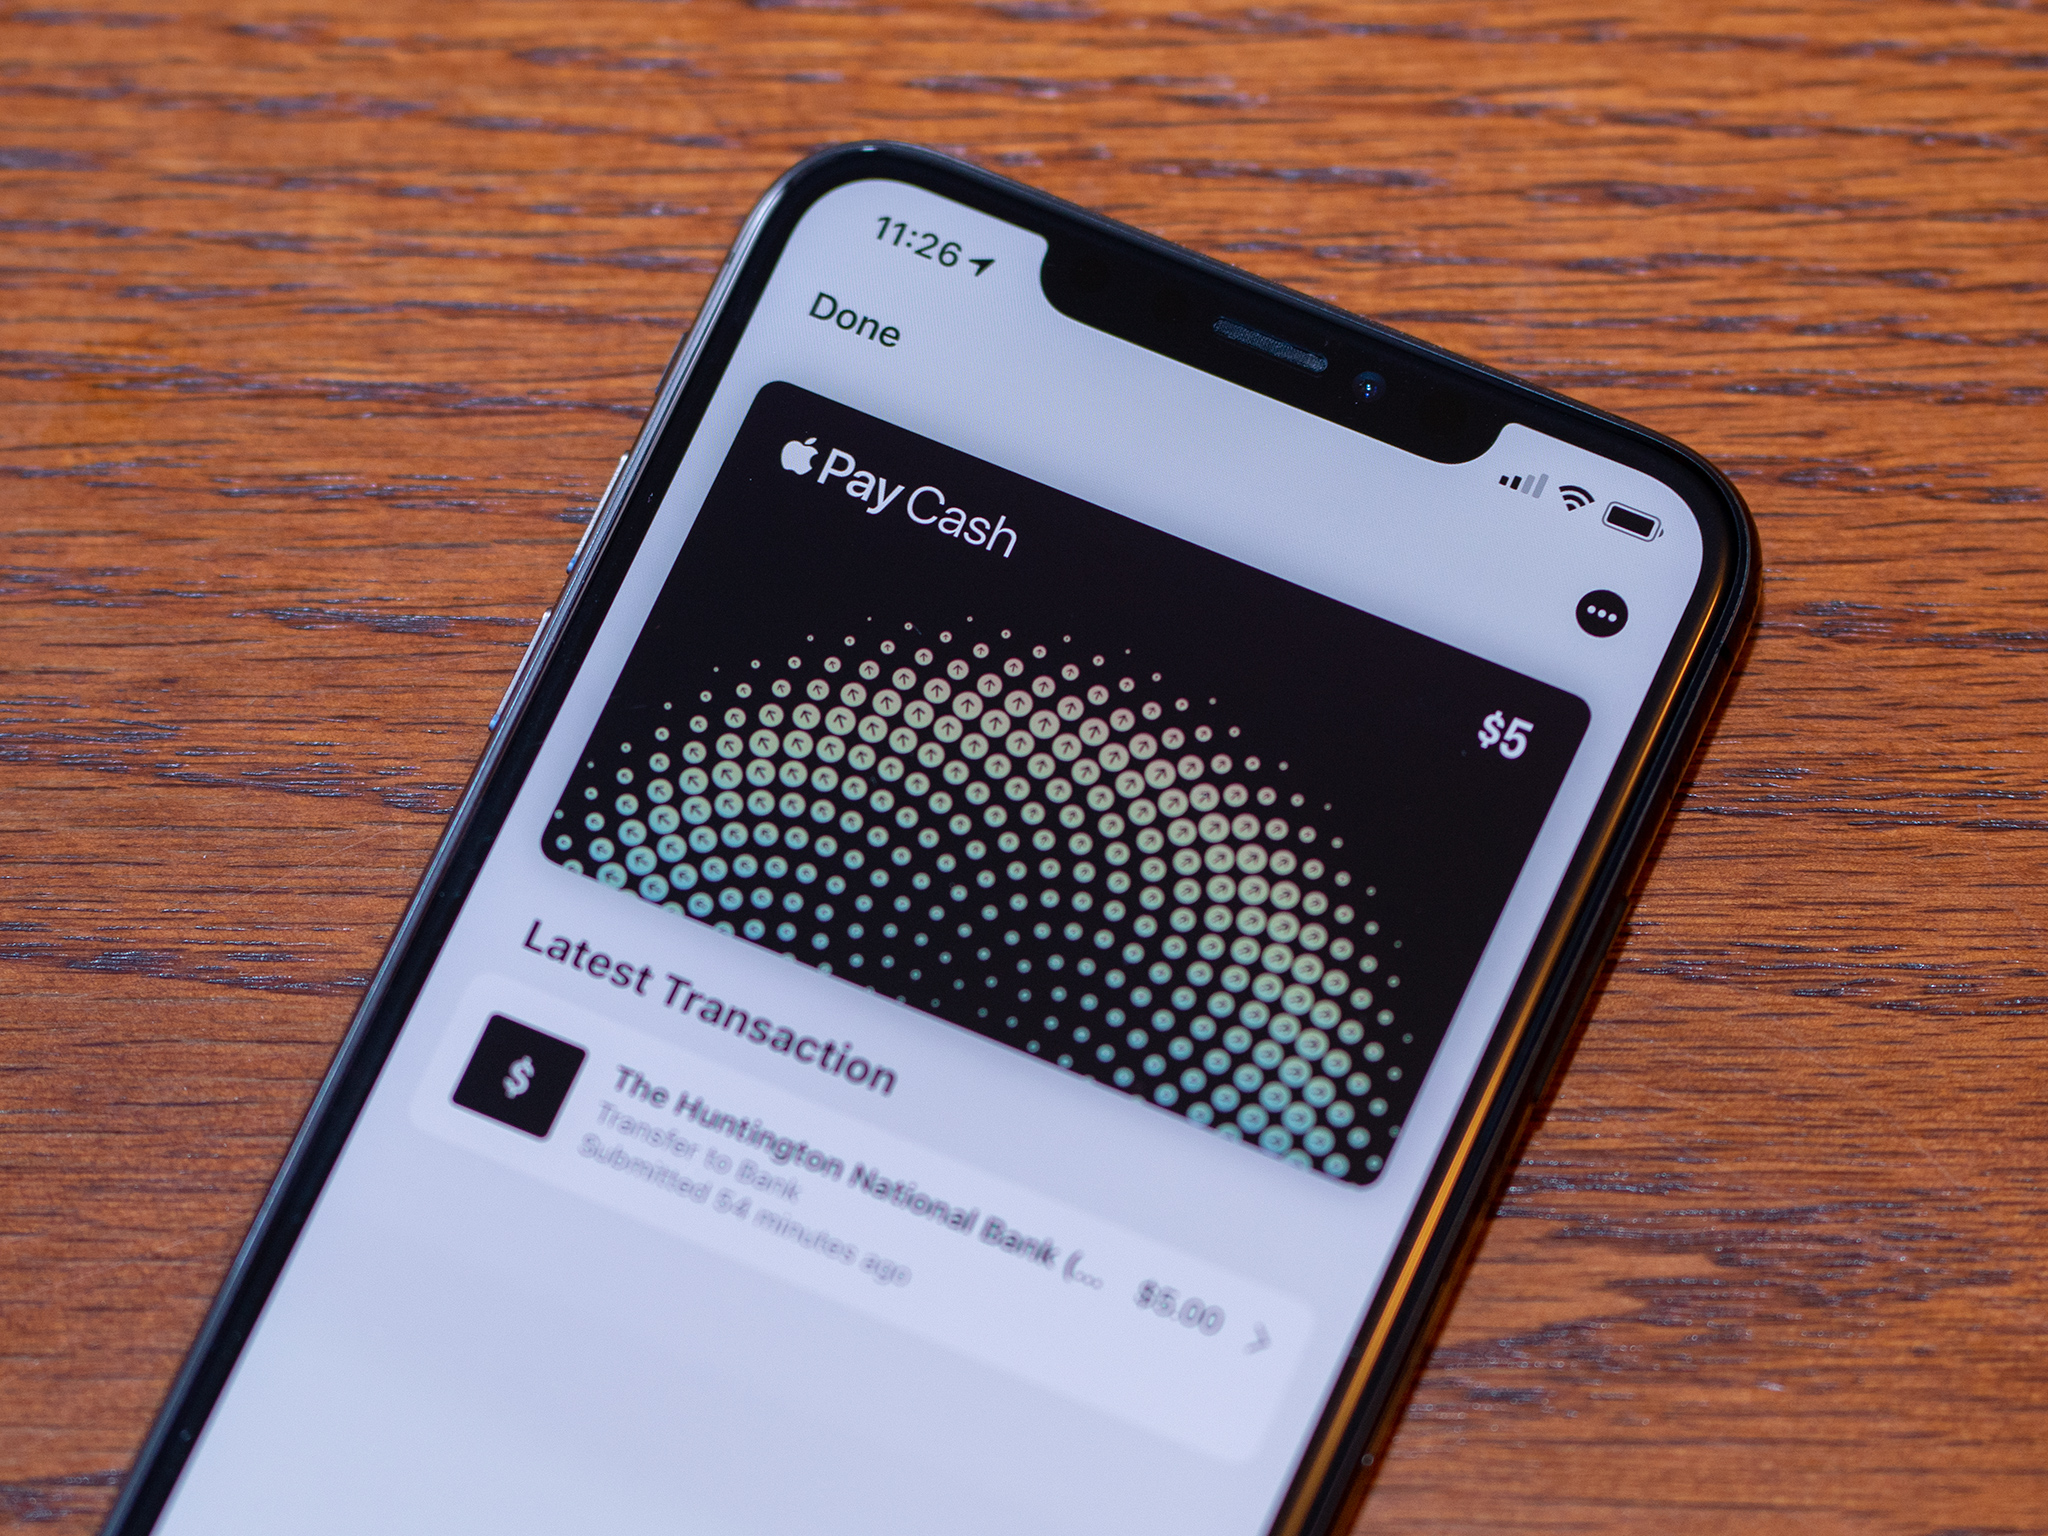 How to send money with Apple Pay Cash in the Messages app